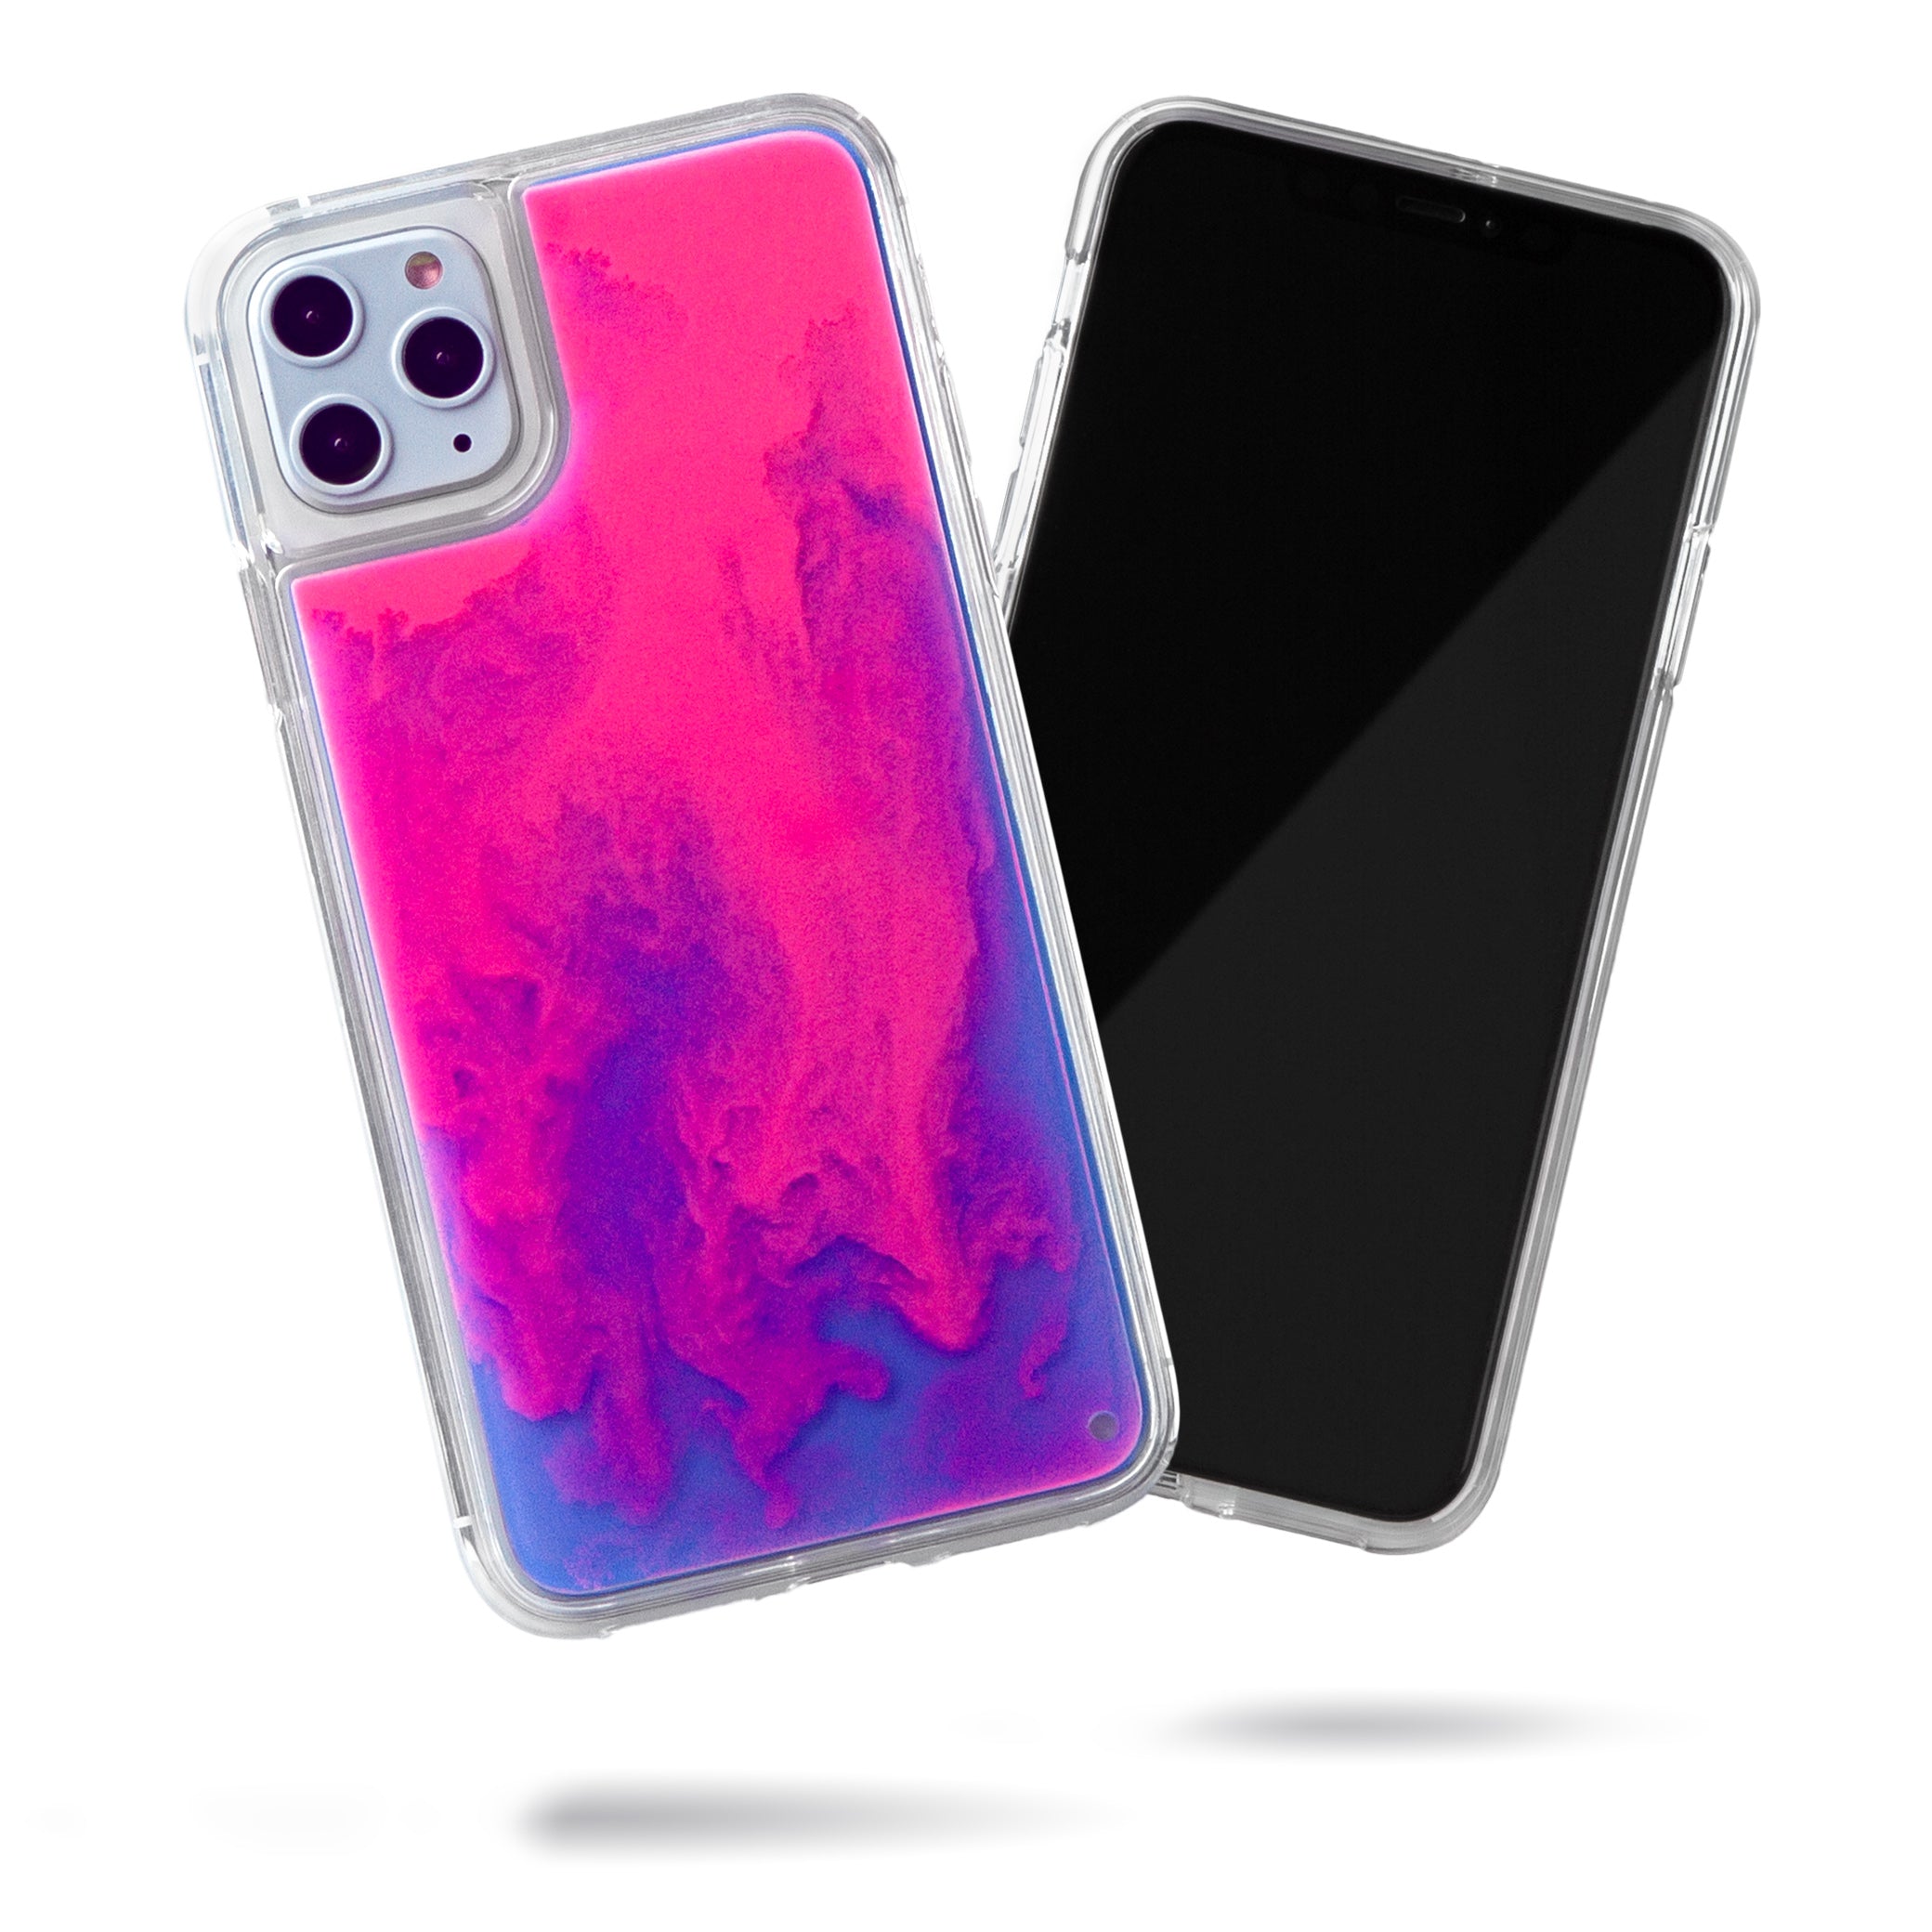 Neon Sand iPhone 11 Pro Max Case - Blueberry and Pink Glow